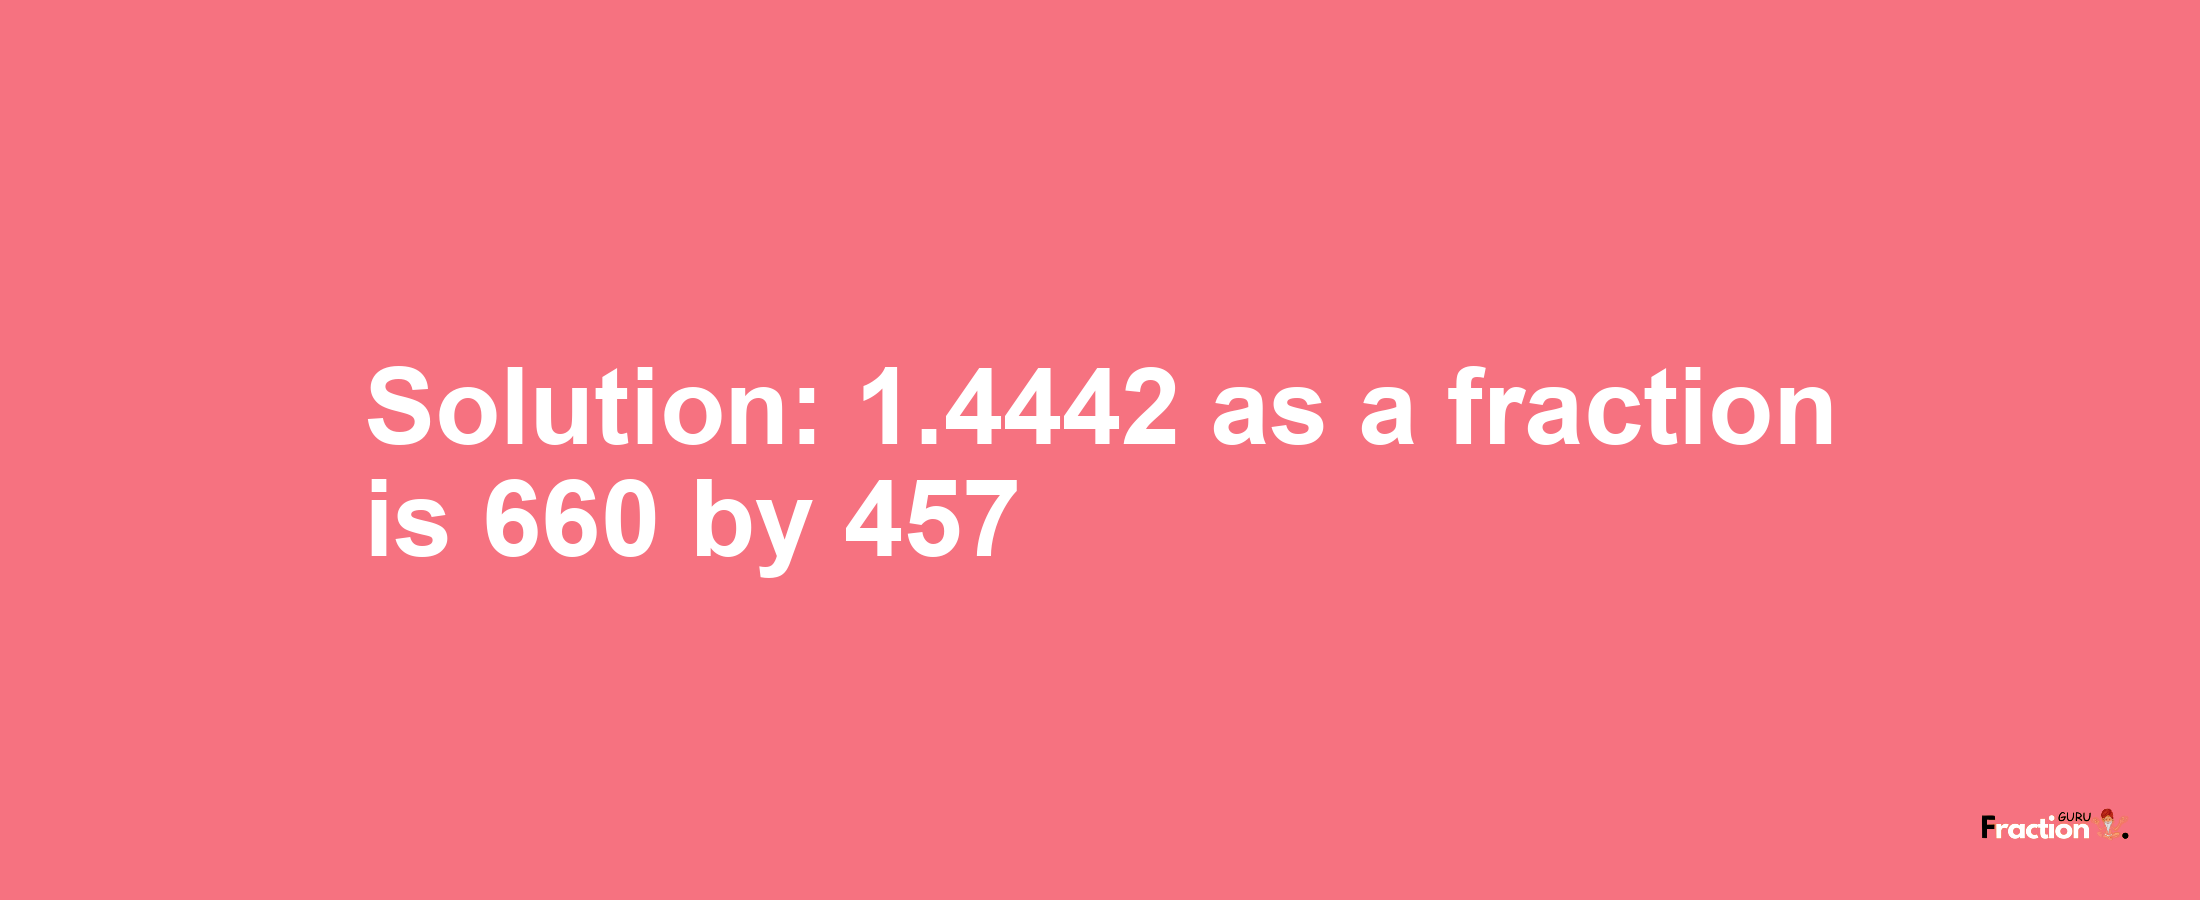 Solution:1.4442 as a fraction is 660/457